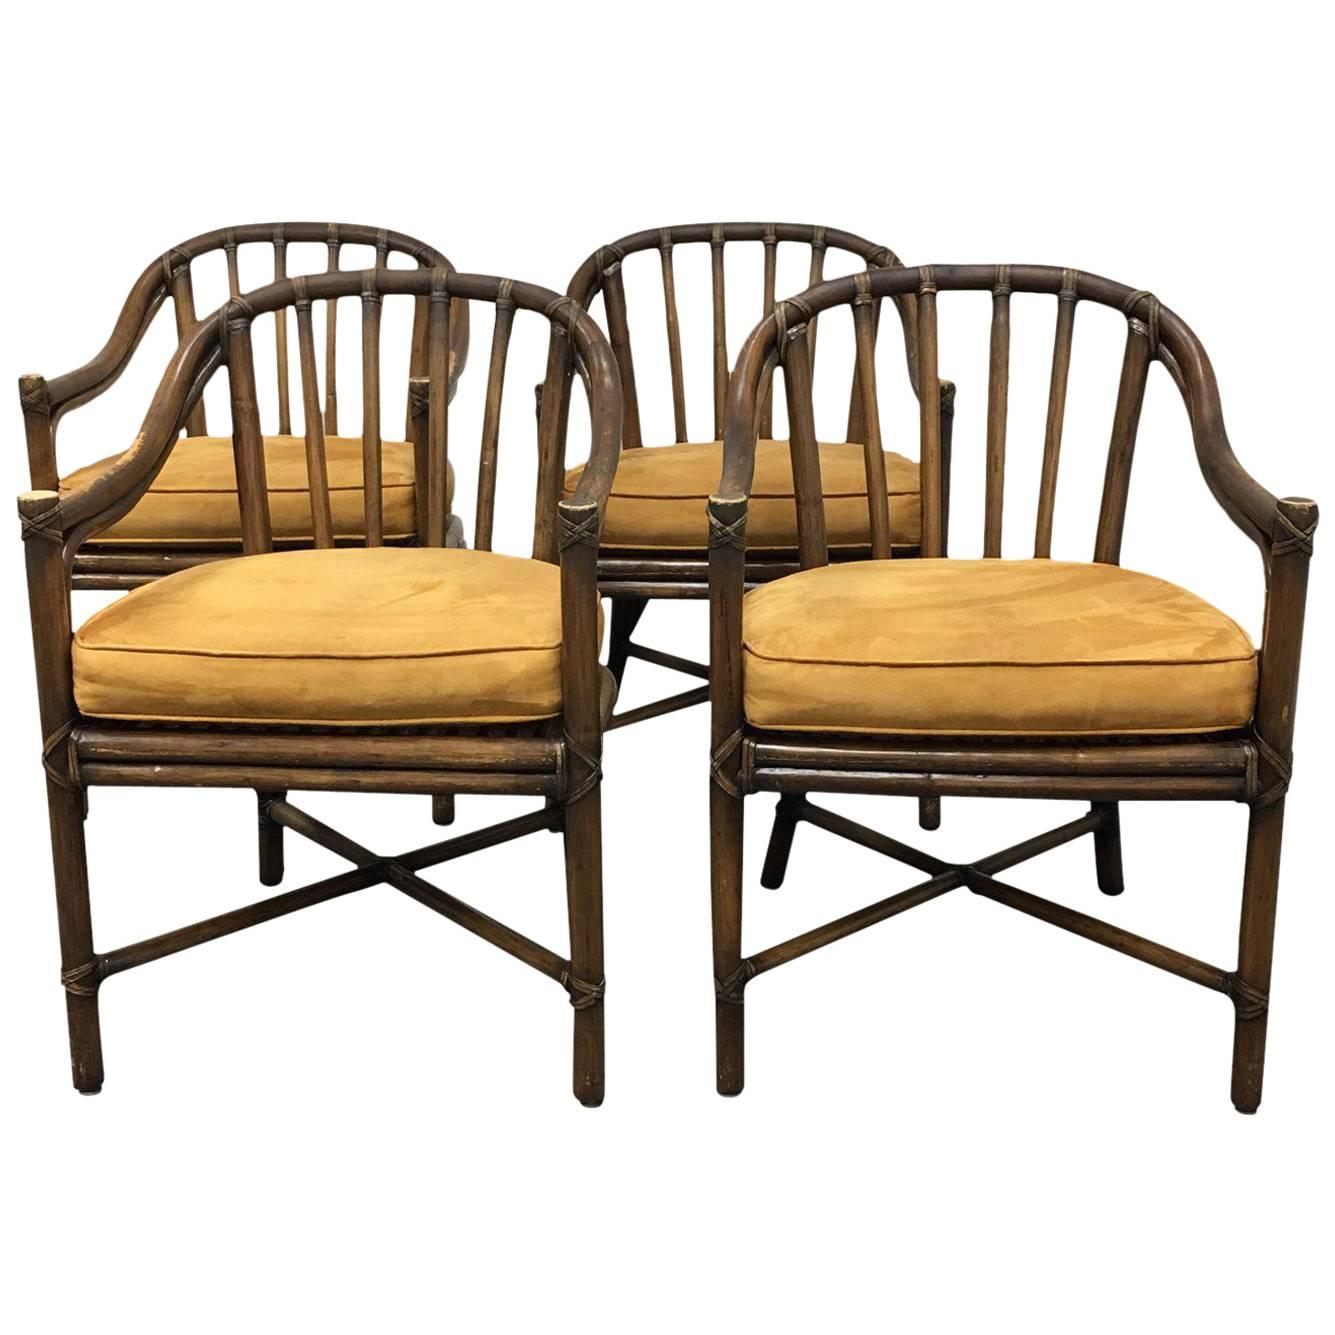 Set of Four McGuire Bamboo Barrel Chairs